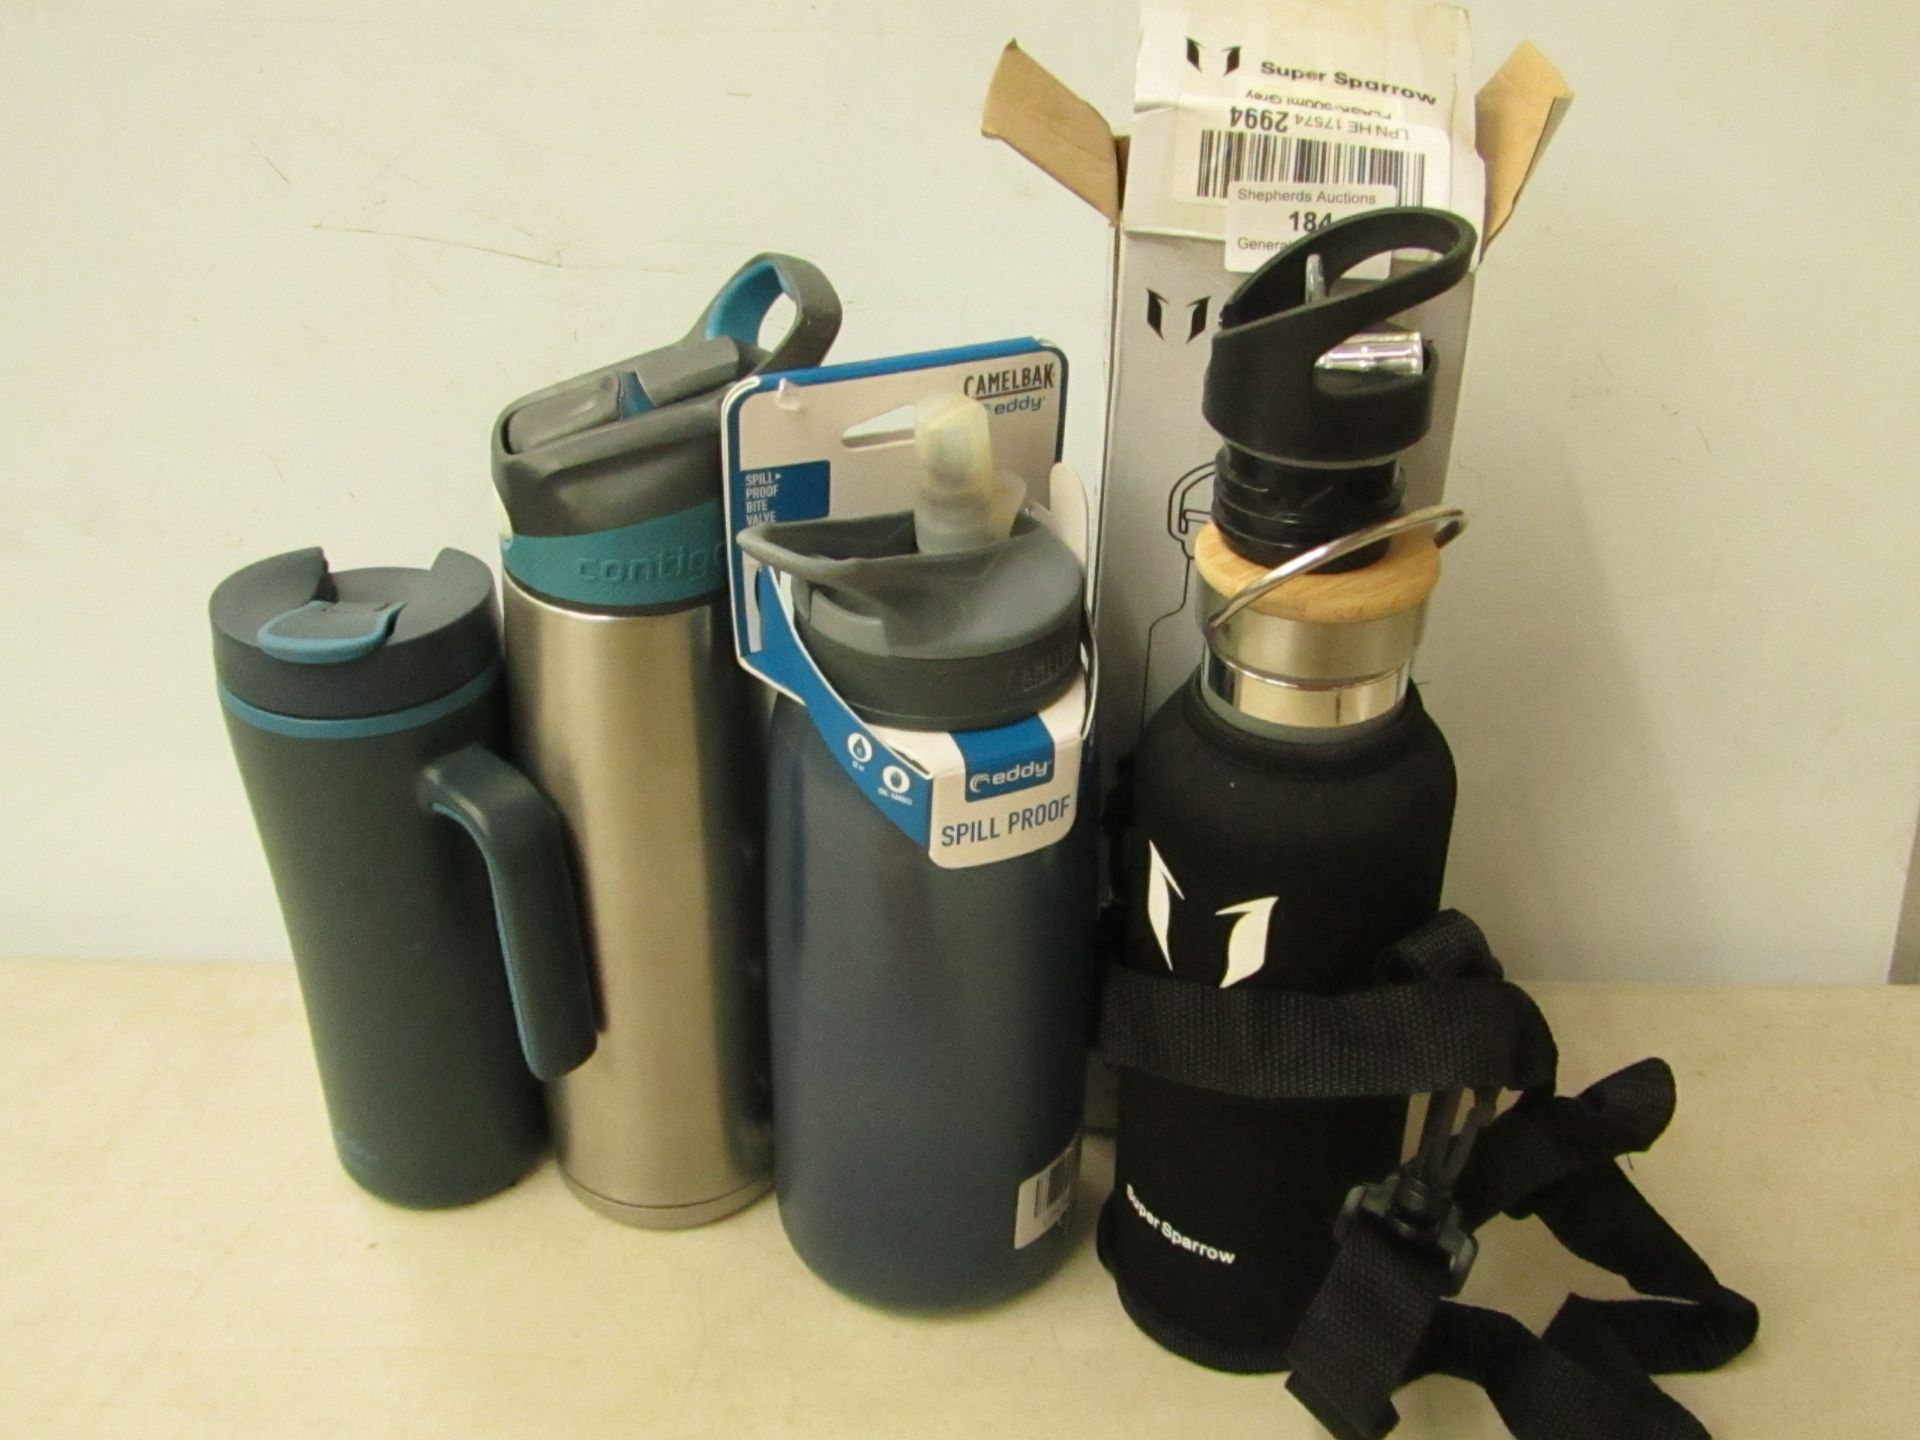 4x Duraible flasks with lids.